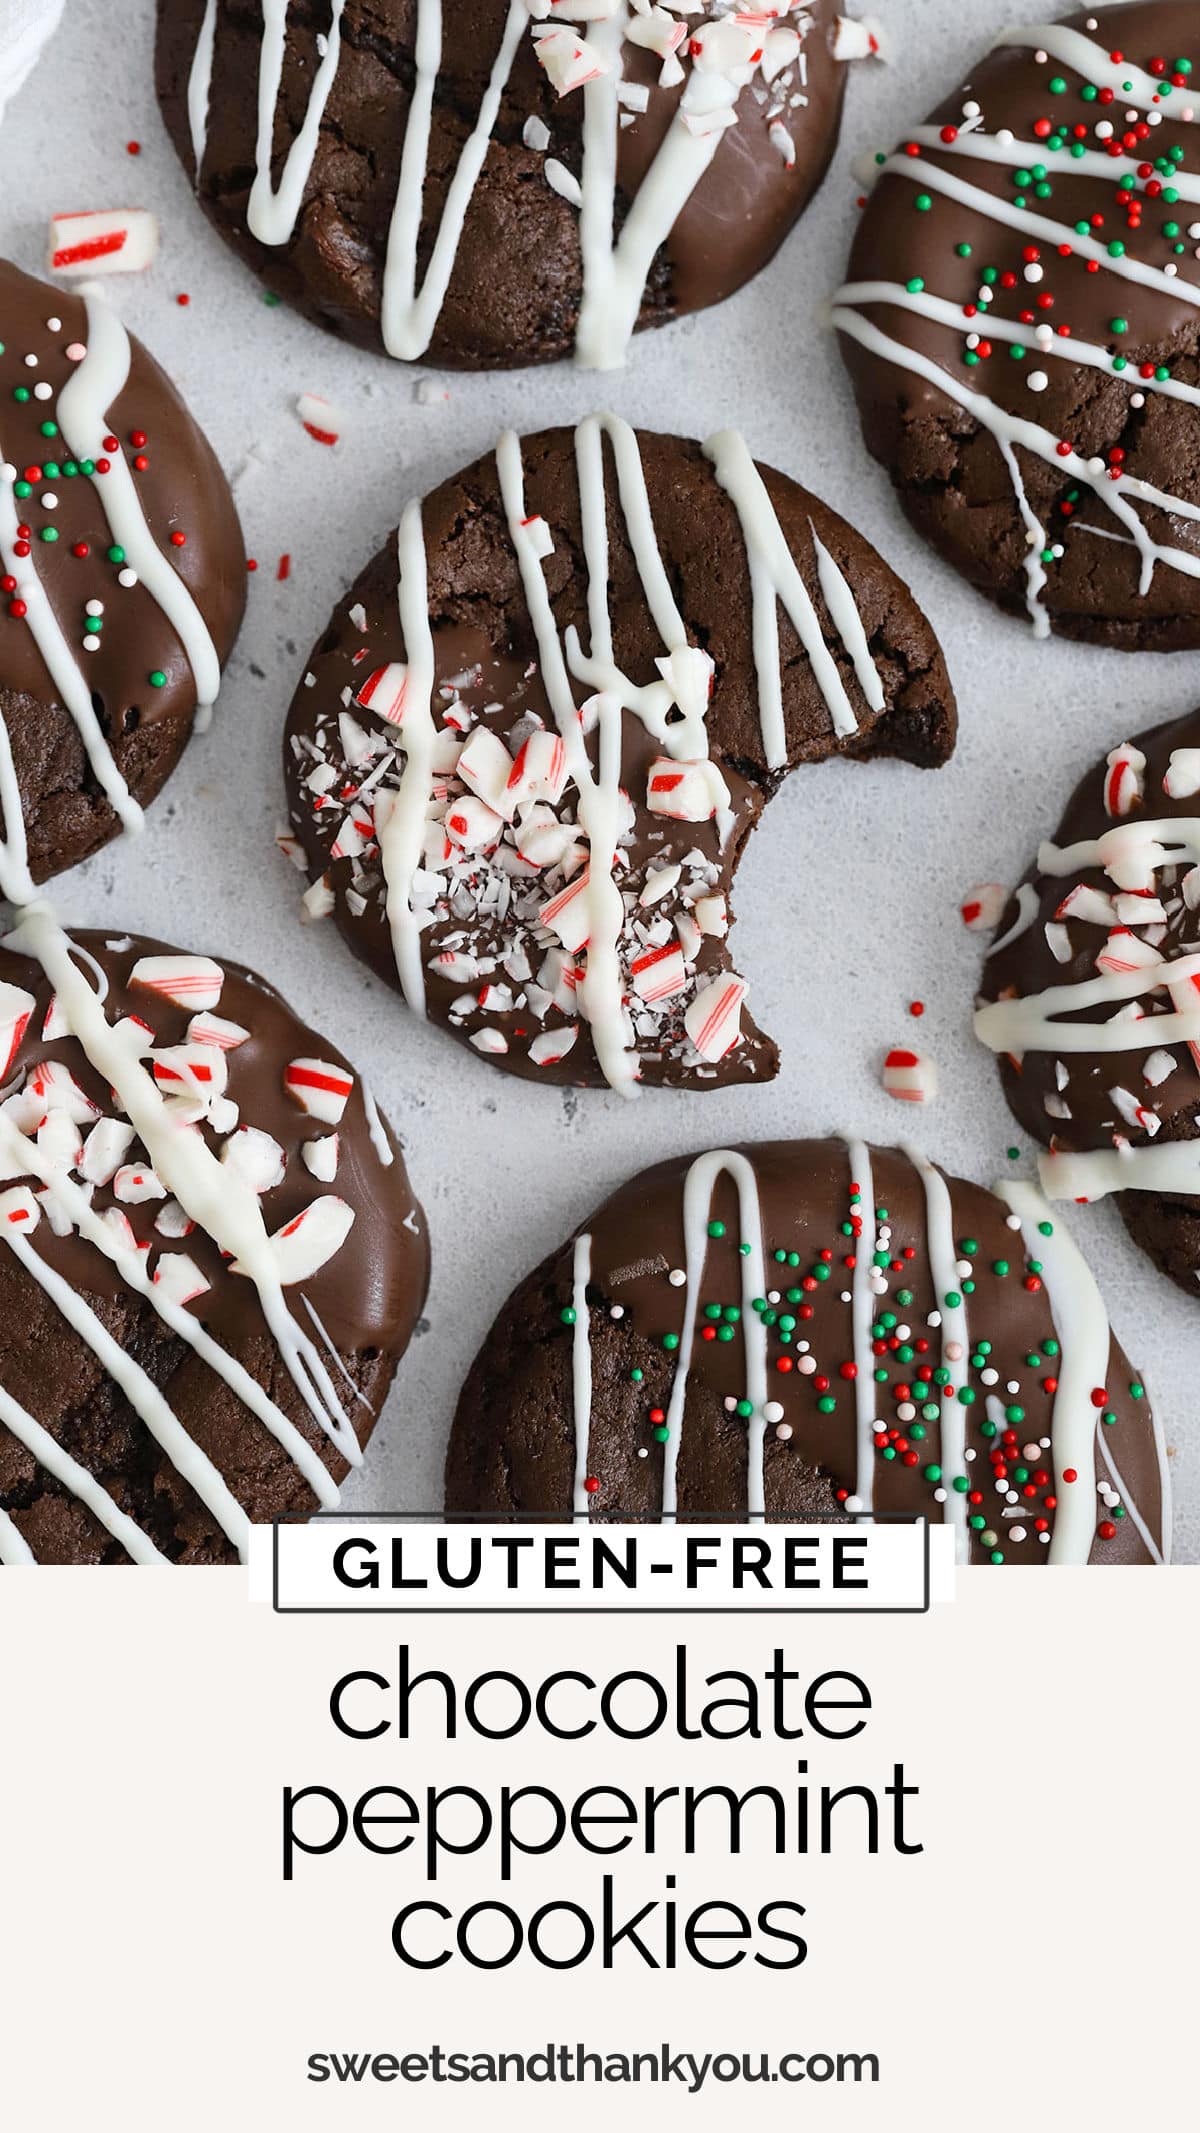 Gluten-Free Chocolate Peppermint Cookies - These fudgy gluten0free chocolate candy cane cookies have a brownie-like texture, a double dose of chocolate & a few fun finishes. A perfect holiday cookie! // gluten-free peppermint cookies / gluten-free holiday cookies / gluten-free christmas cookies / glute-free peppermint brownie cookies / gluten-free chocolate peppermint cookie recipe / gluten-free peppermint cookie recipe / gluten-free candy cane cookie recipe